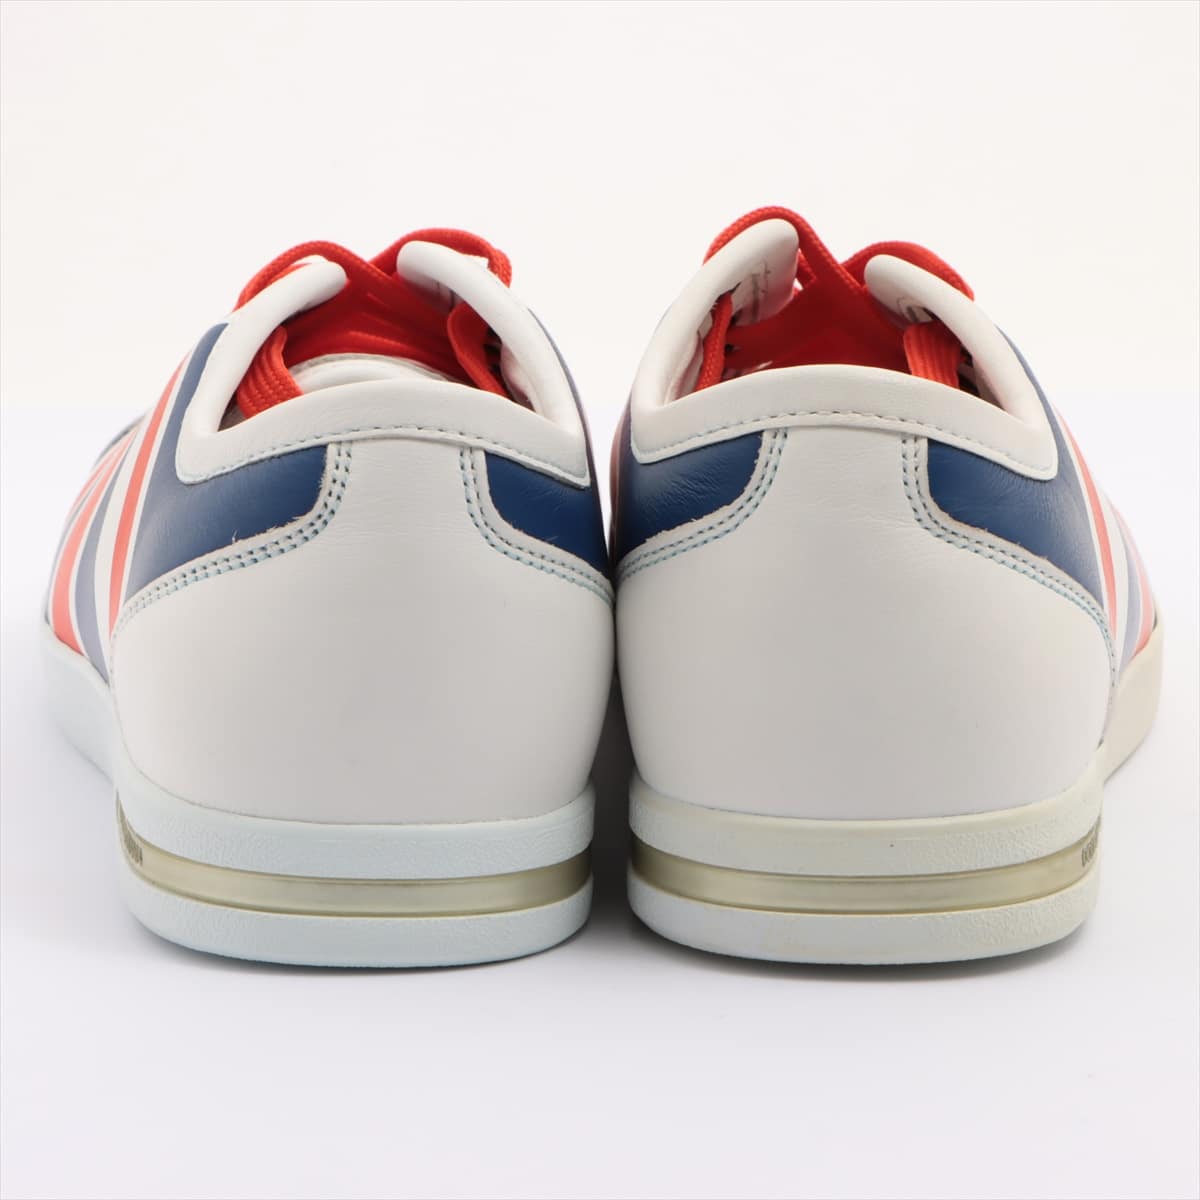 Dolce & Gabbana Leather Sneakers 7 Men's White